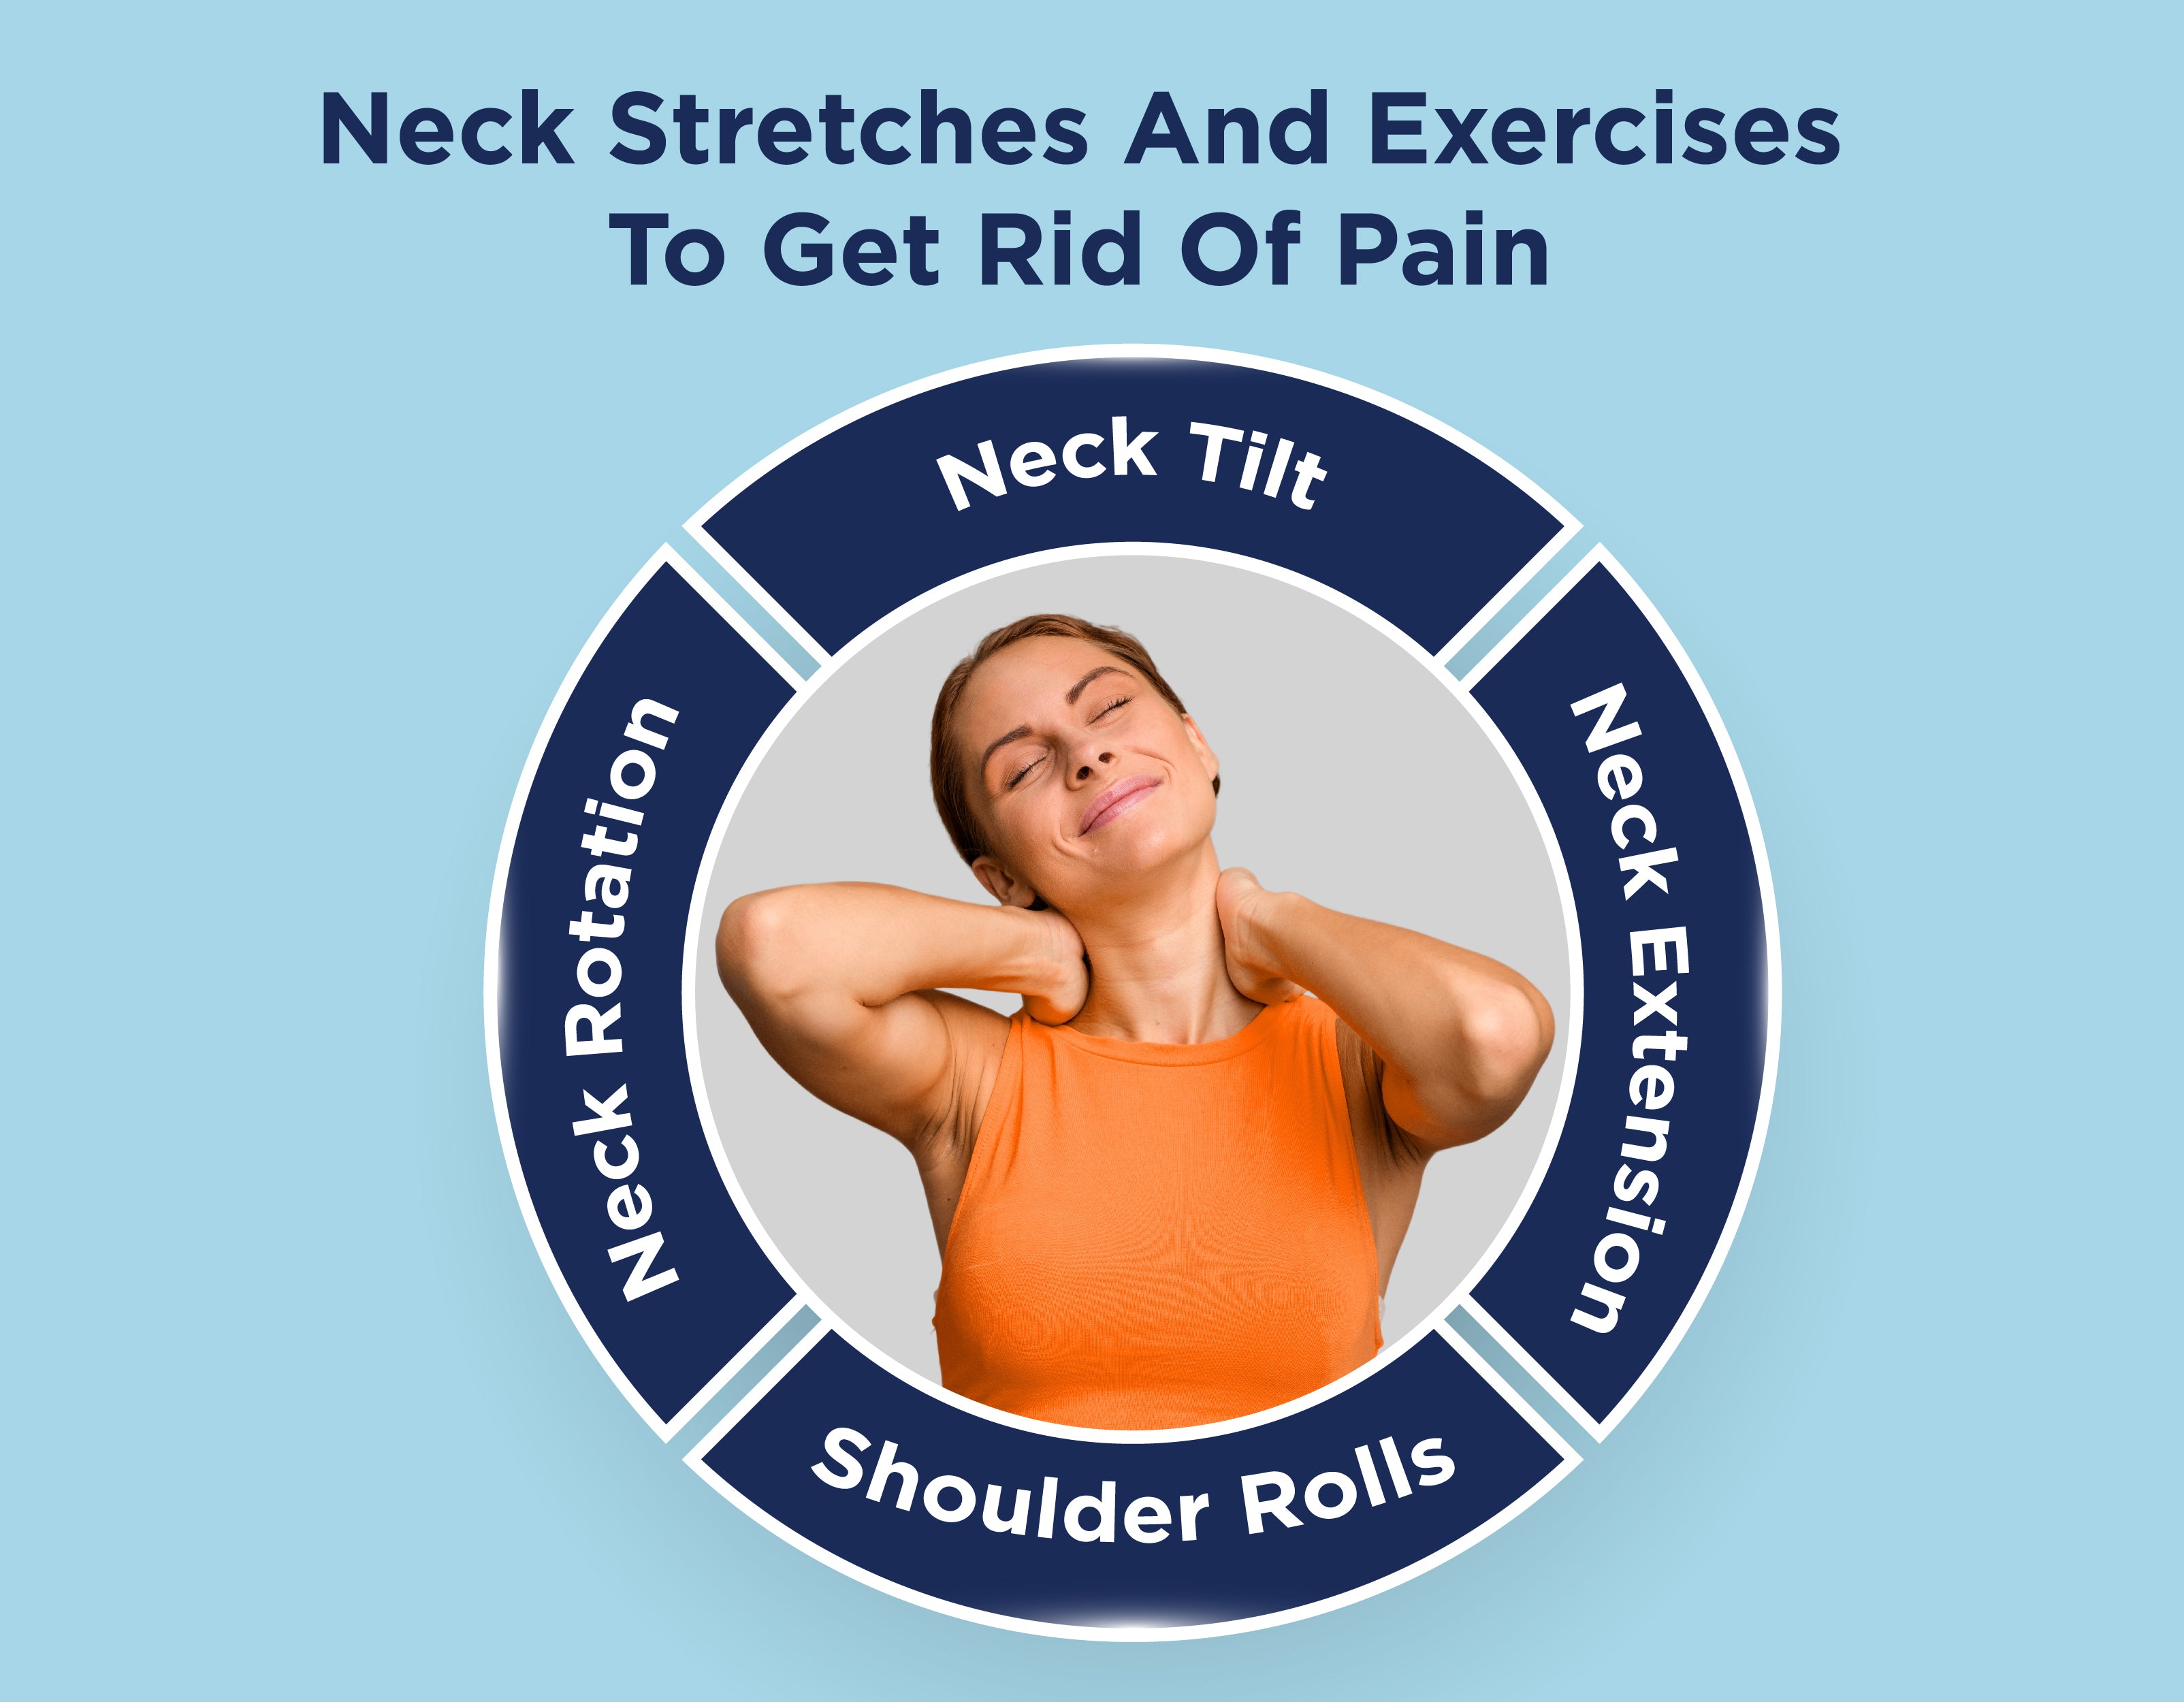 9 Neck Stretches And Exercises To Get Rid Of Pain